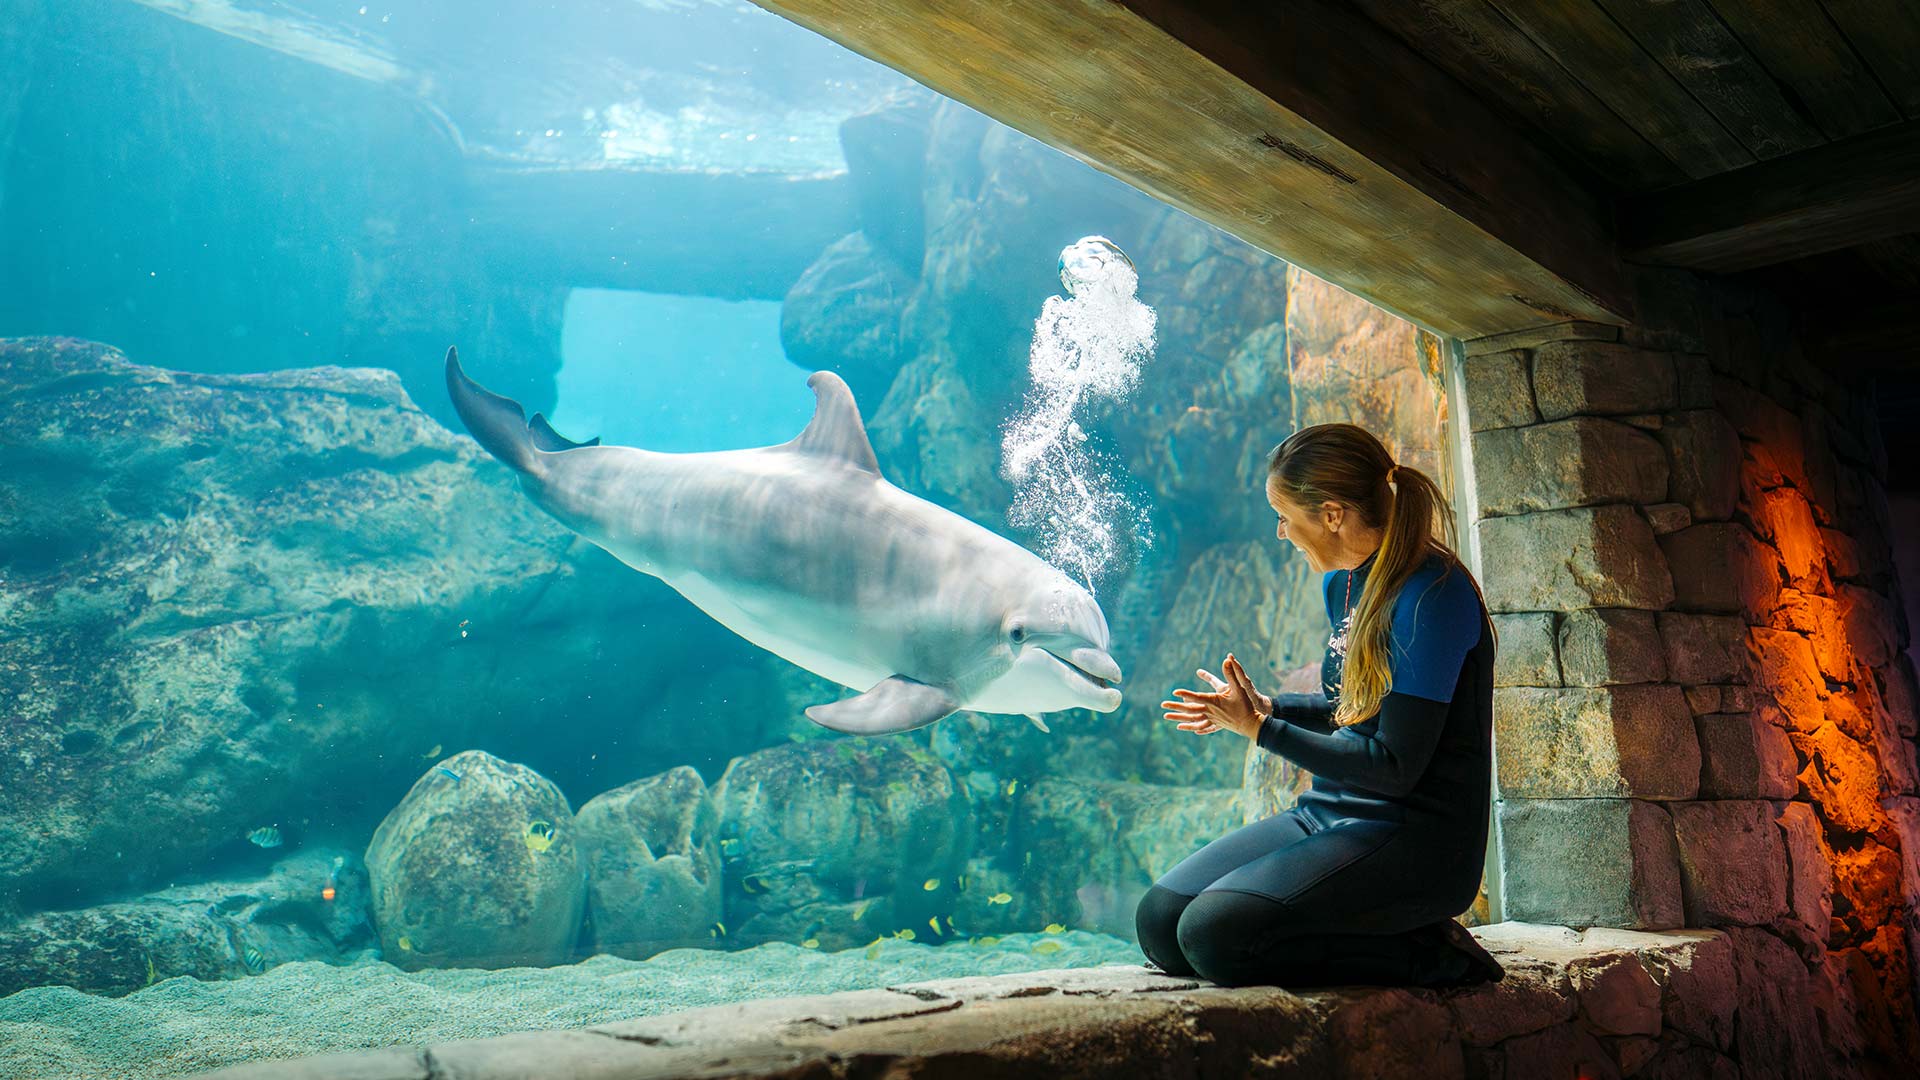 Marine specialist interacting with a dolphin in the aquarium